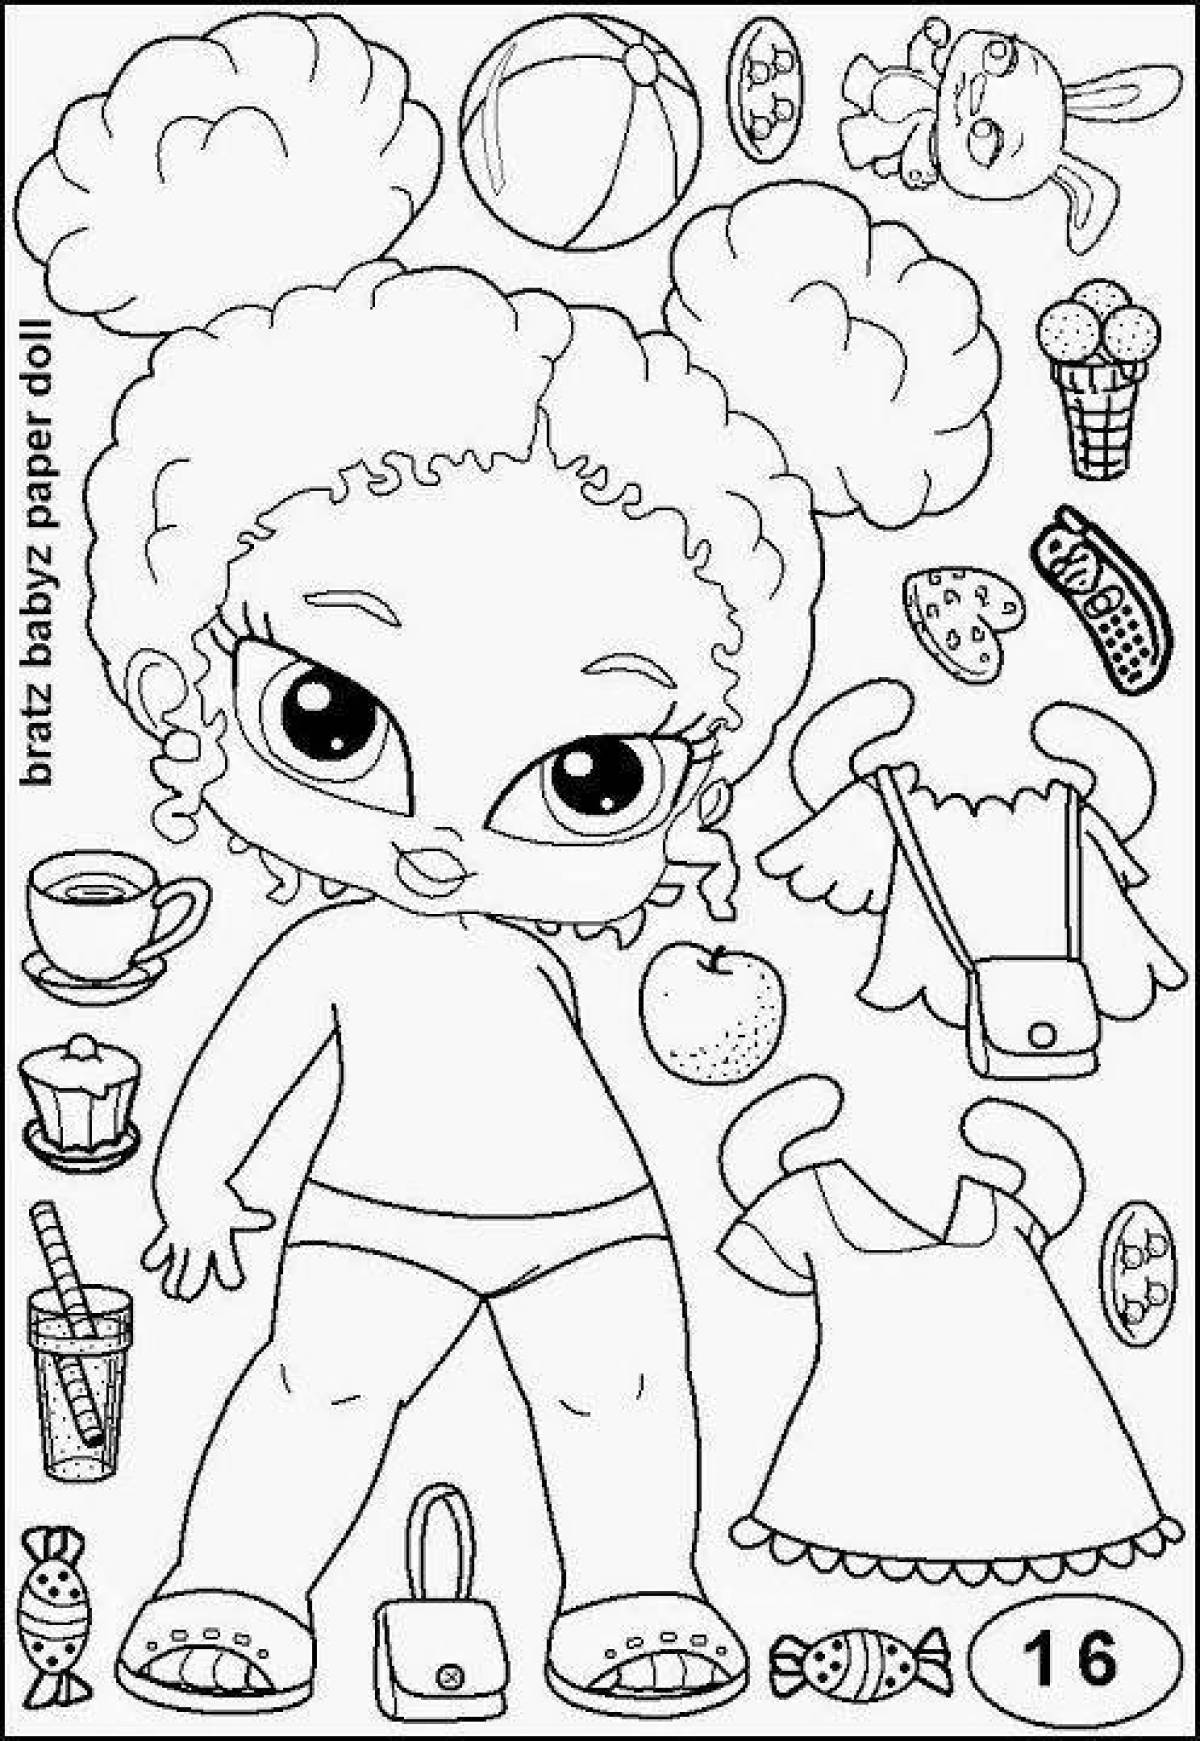 Cute lol doll coloring book with clothes